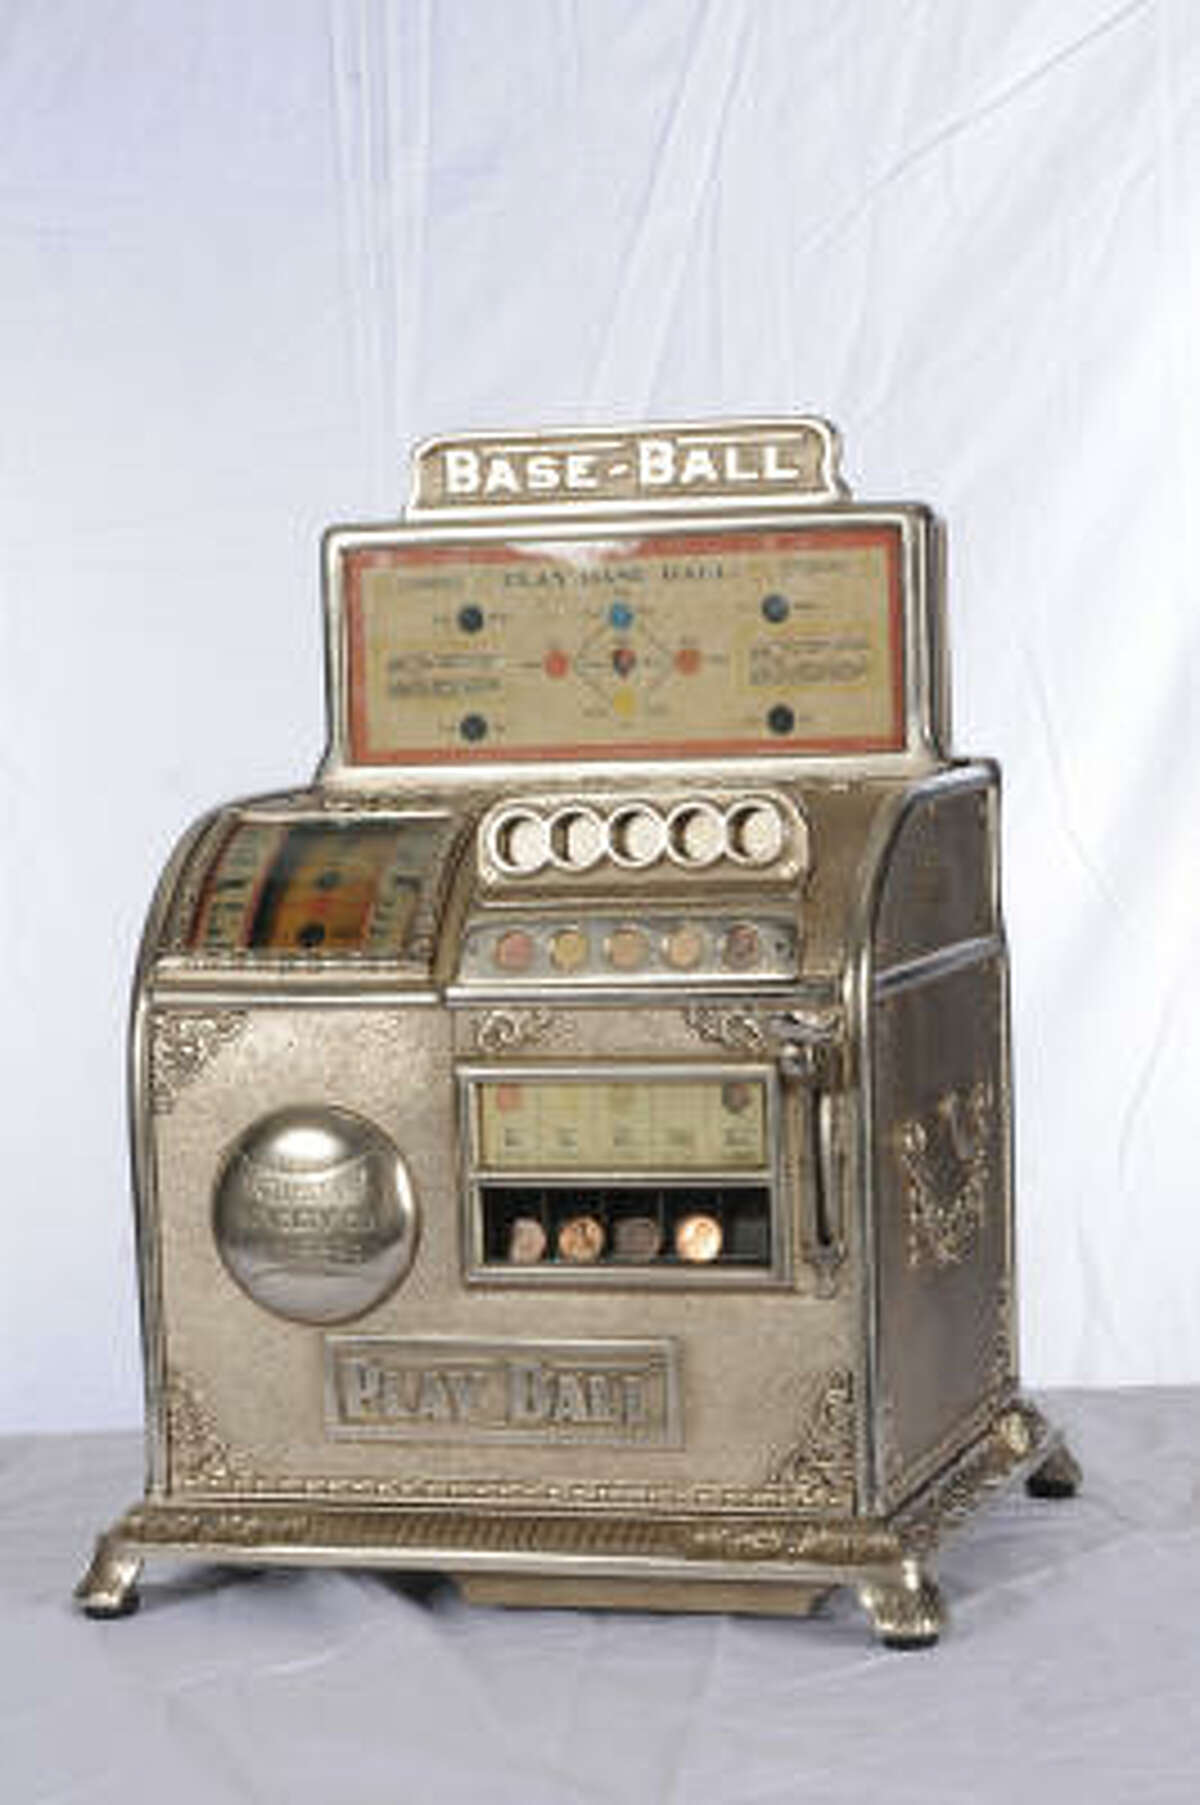 Also at the HADA show is a 1911 Caille baseball slot machine from Daniels Antiques.